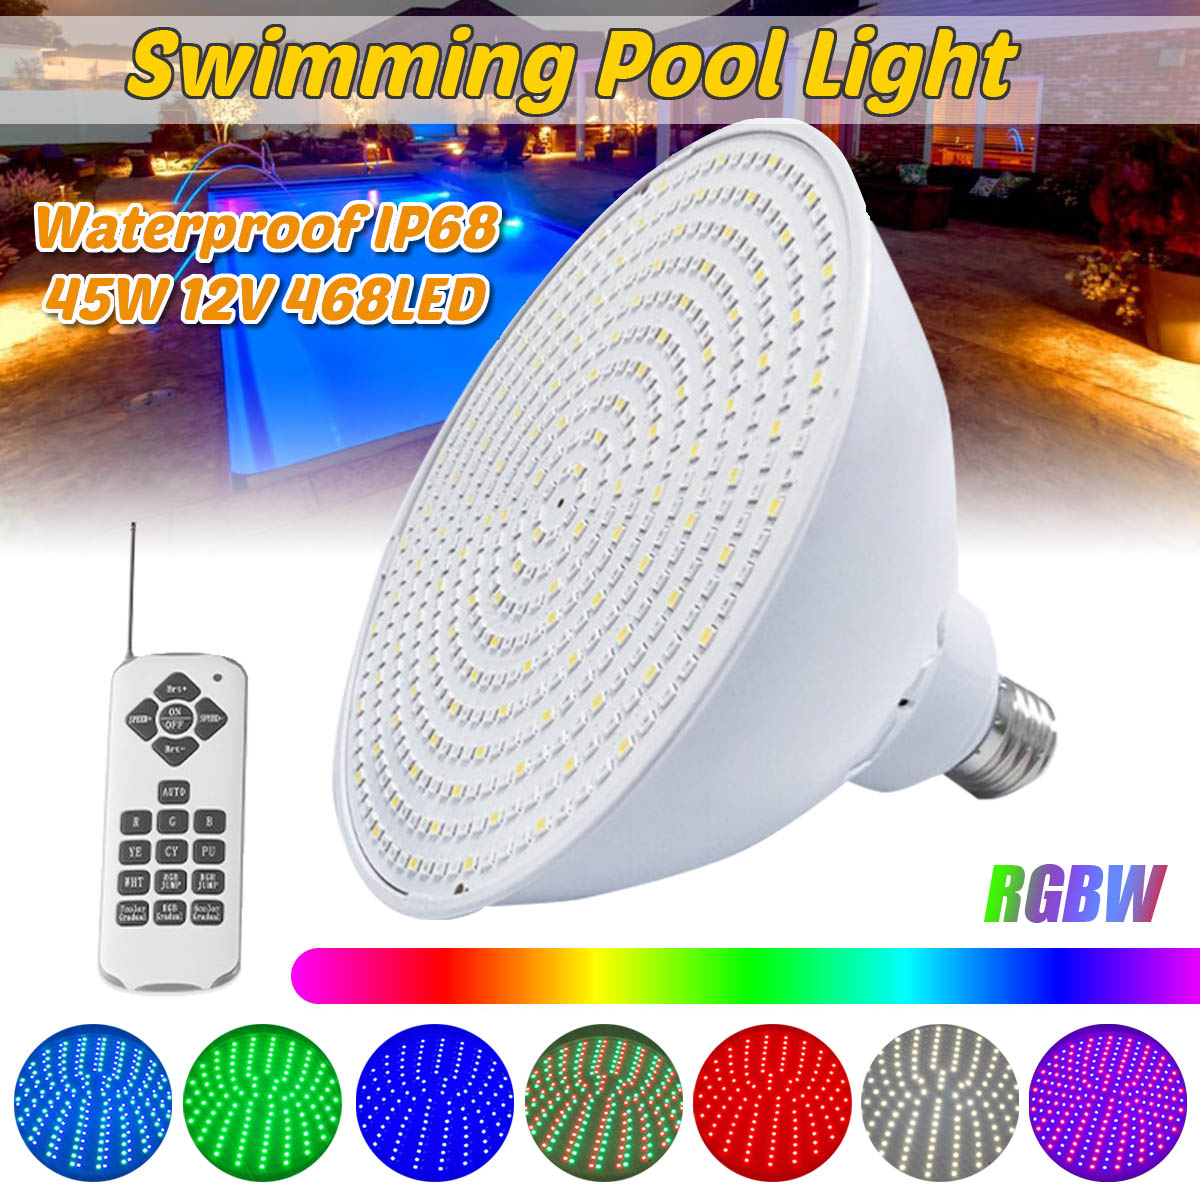 Find 12V E27 45W Waterproof LED Pool Light Underwater RGBW Color Change Lamp with Remote Control for Sale on Gipsybee.com with cryptocurrencies